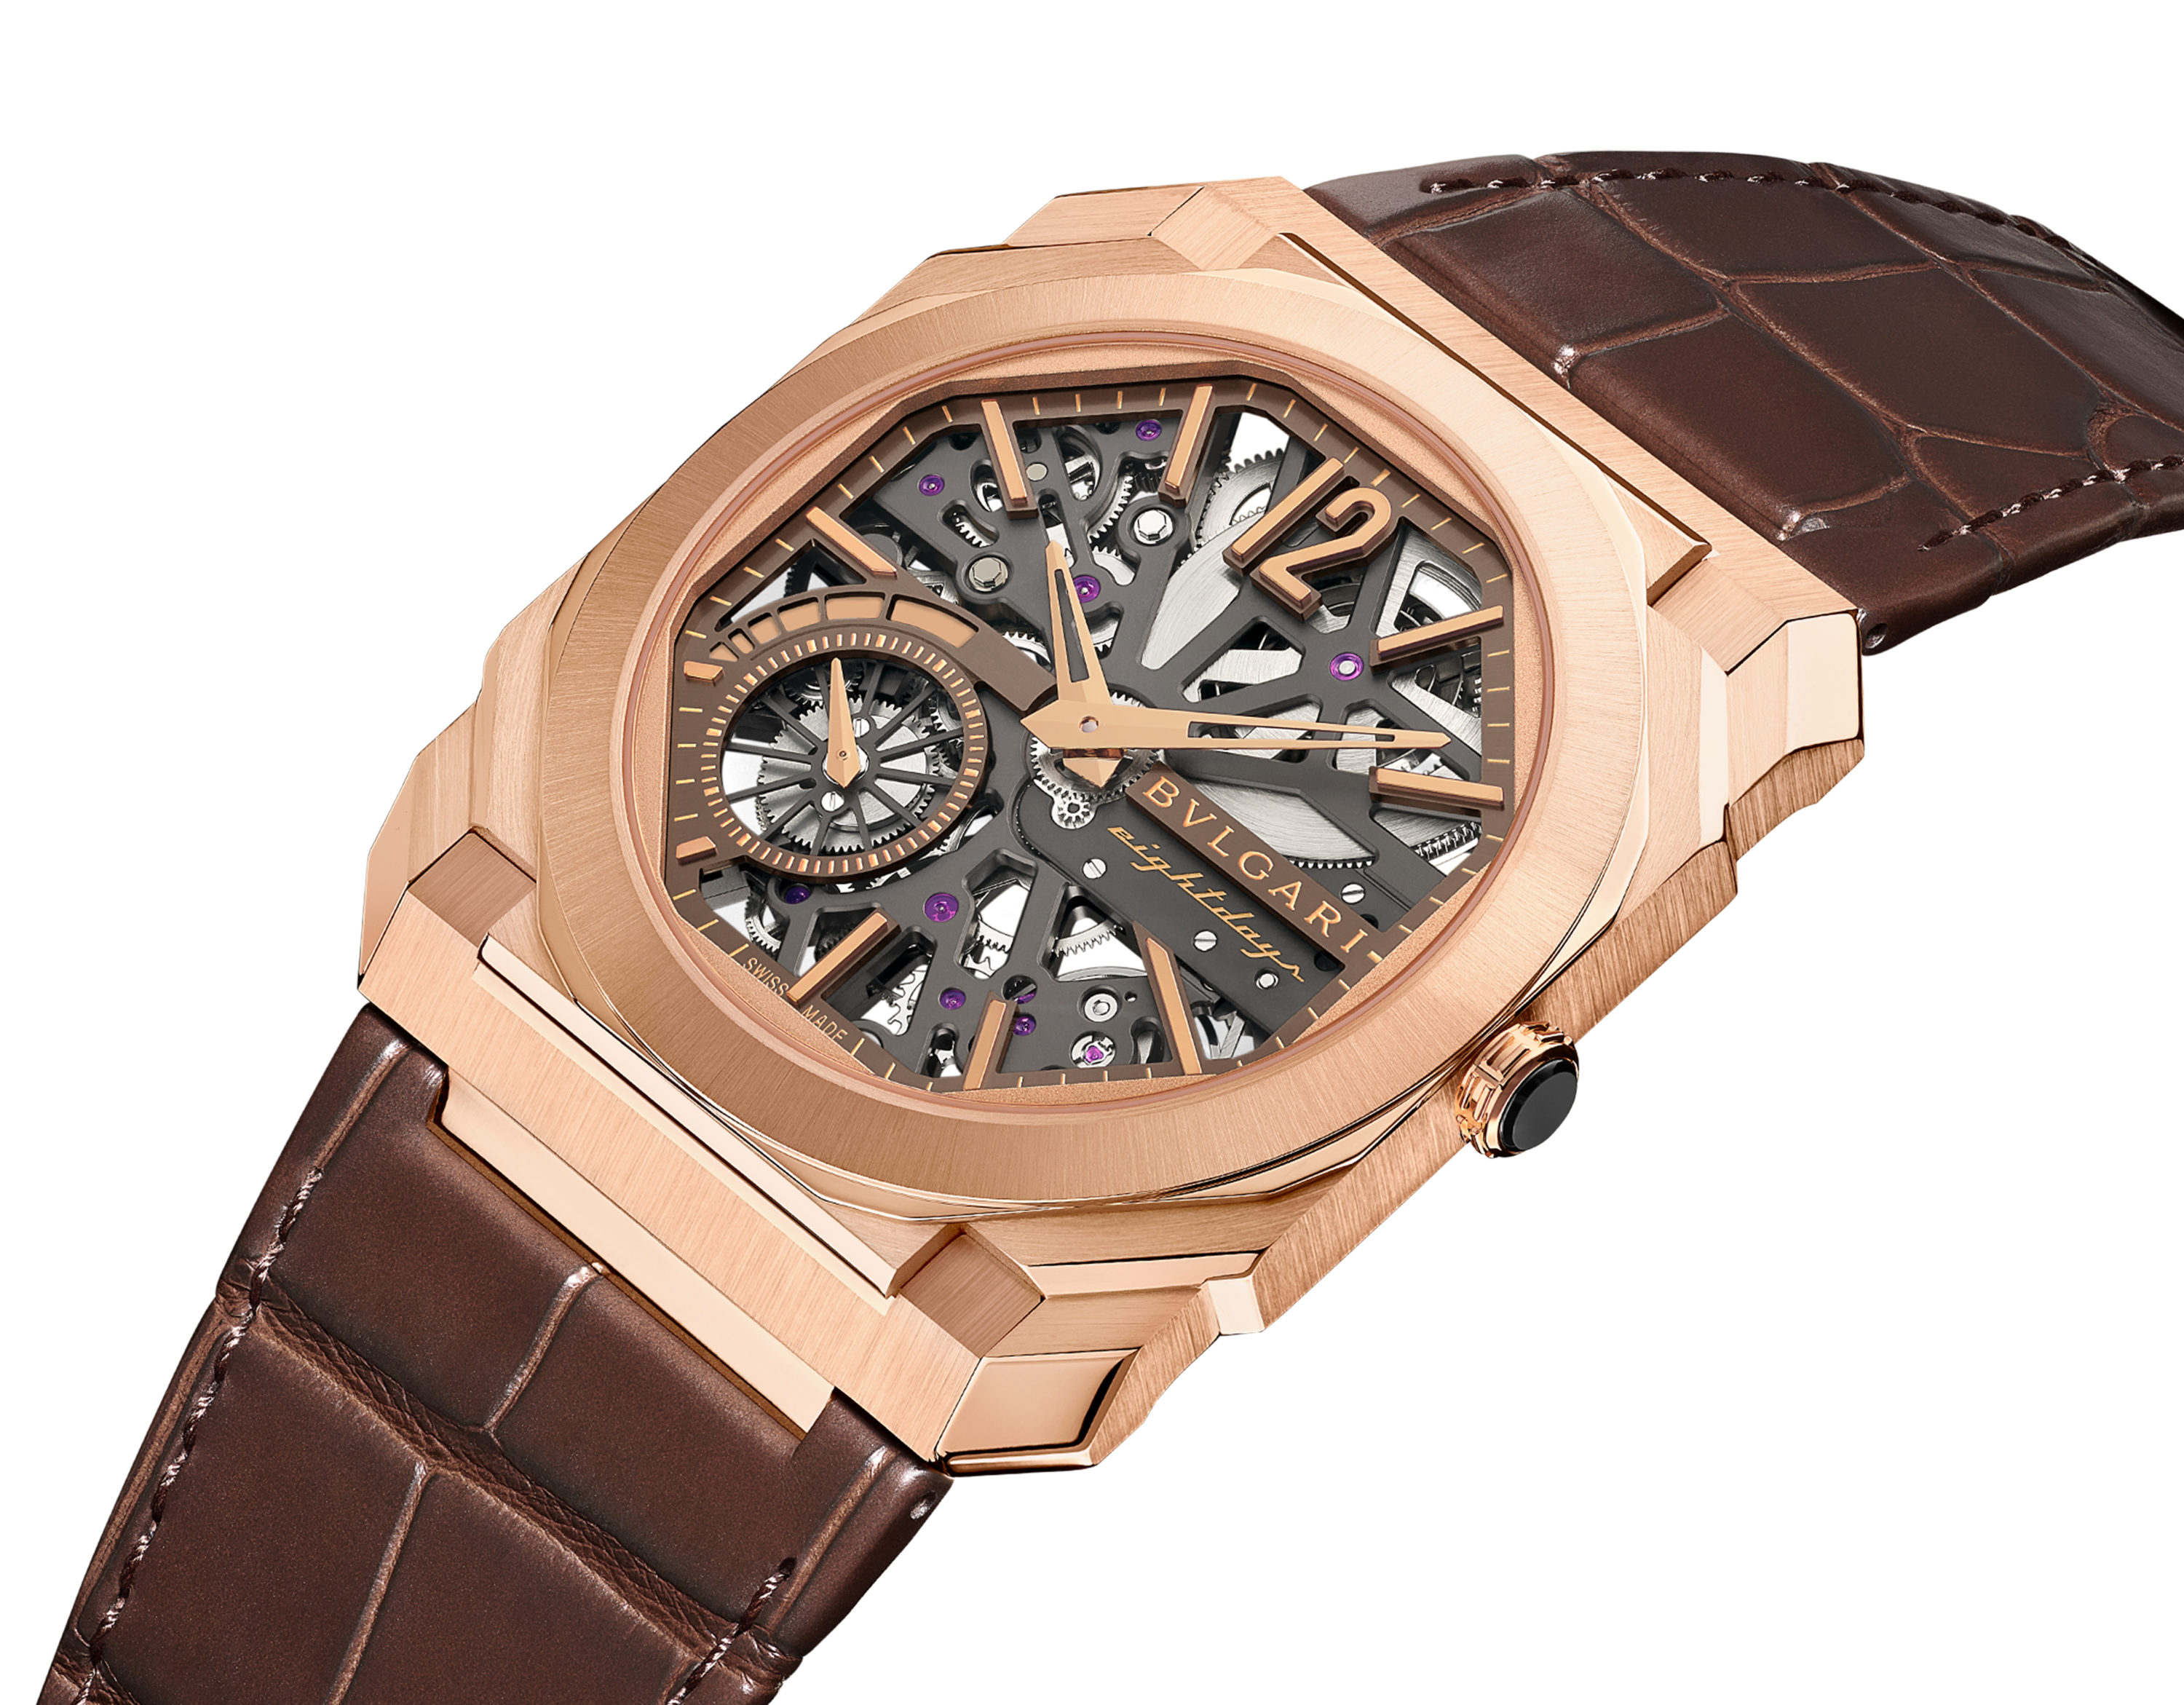 Marking 10 Years, Bulgari Expands Octo Finissimo Range with Four New Designs